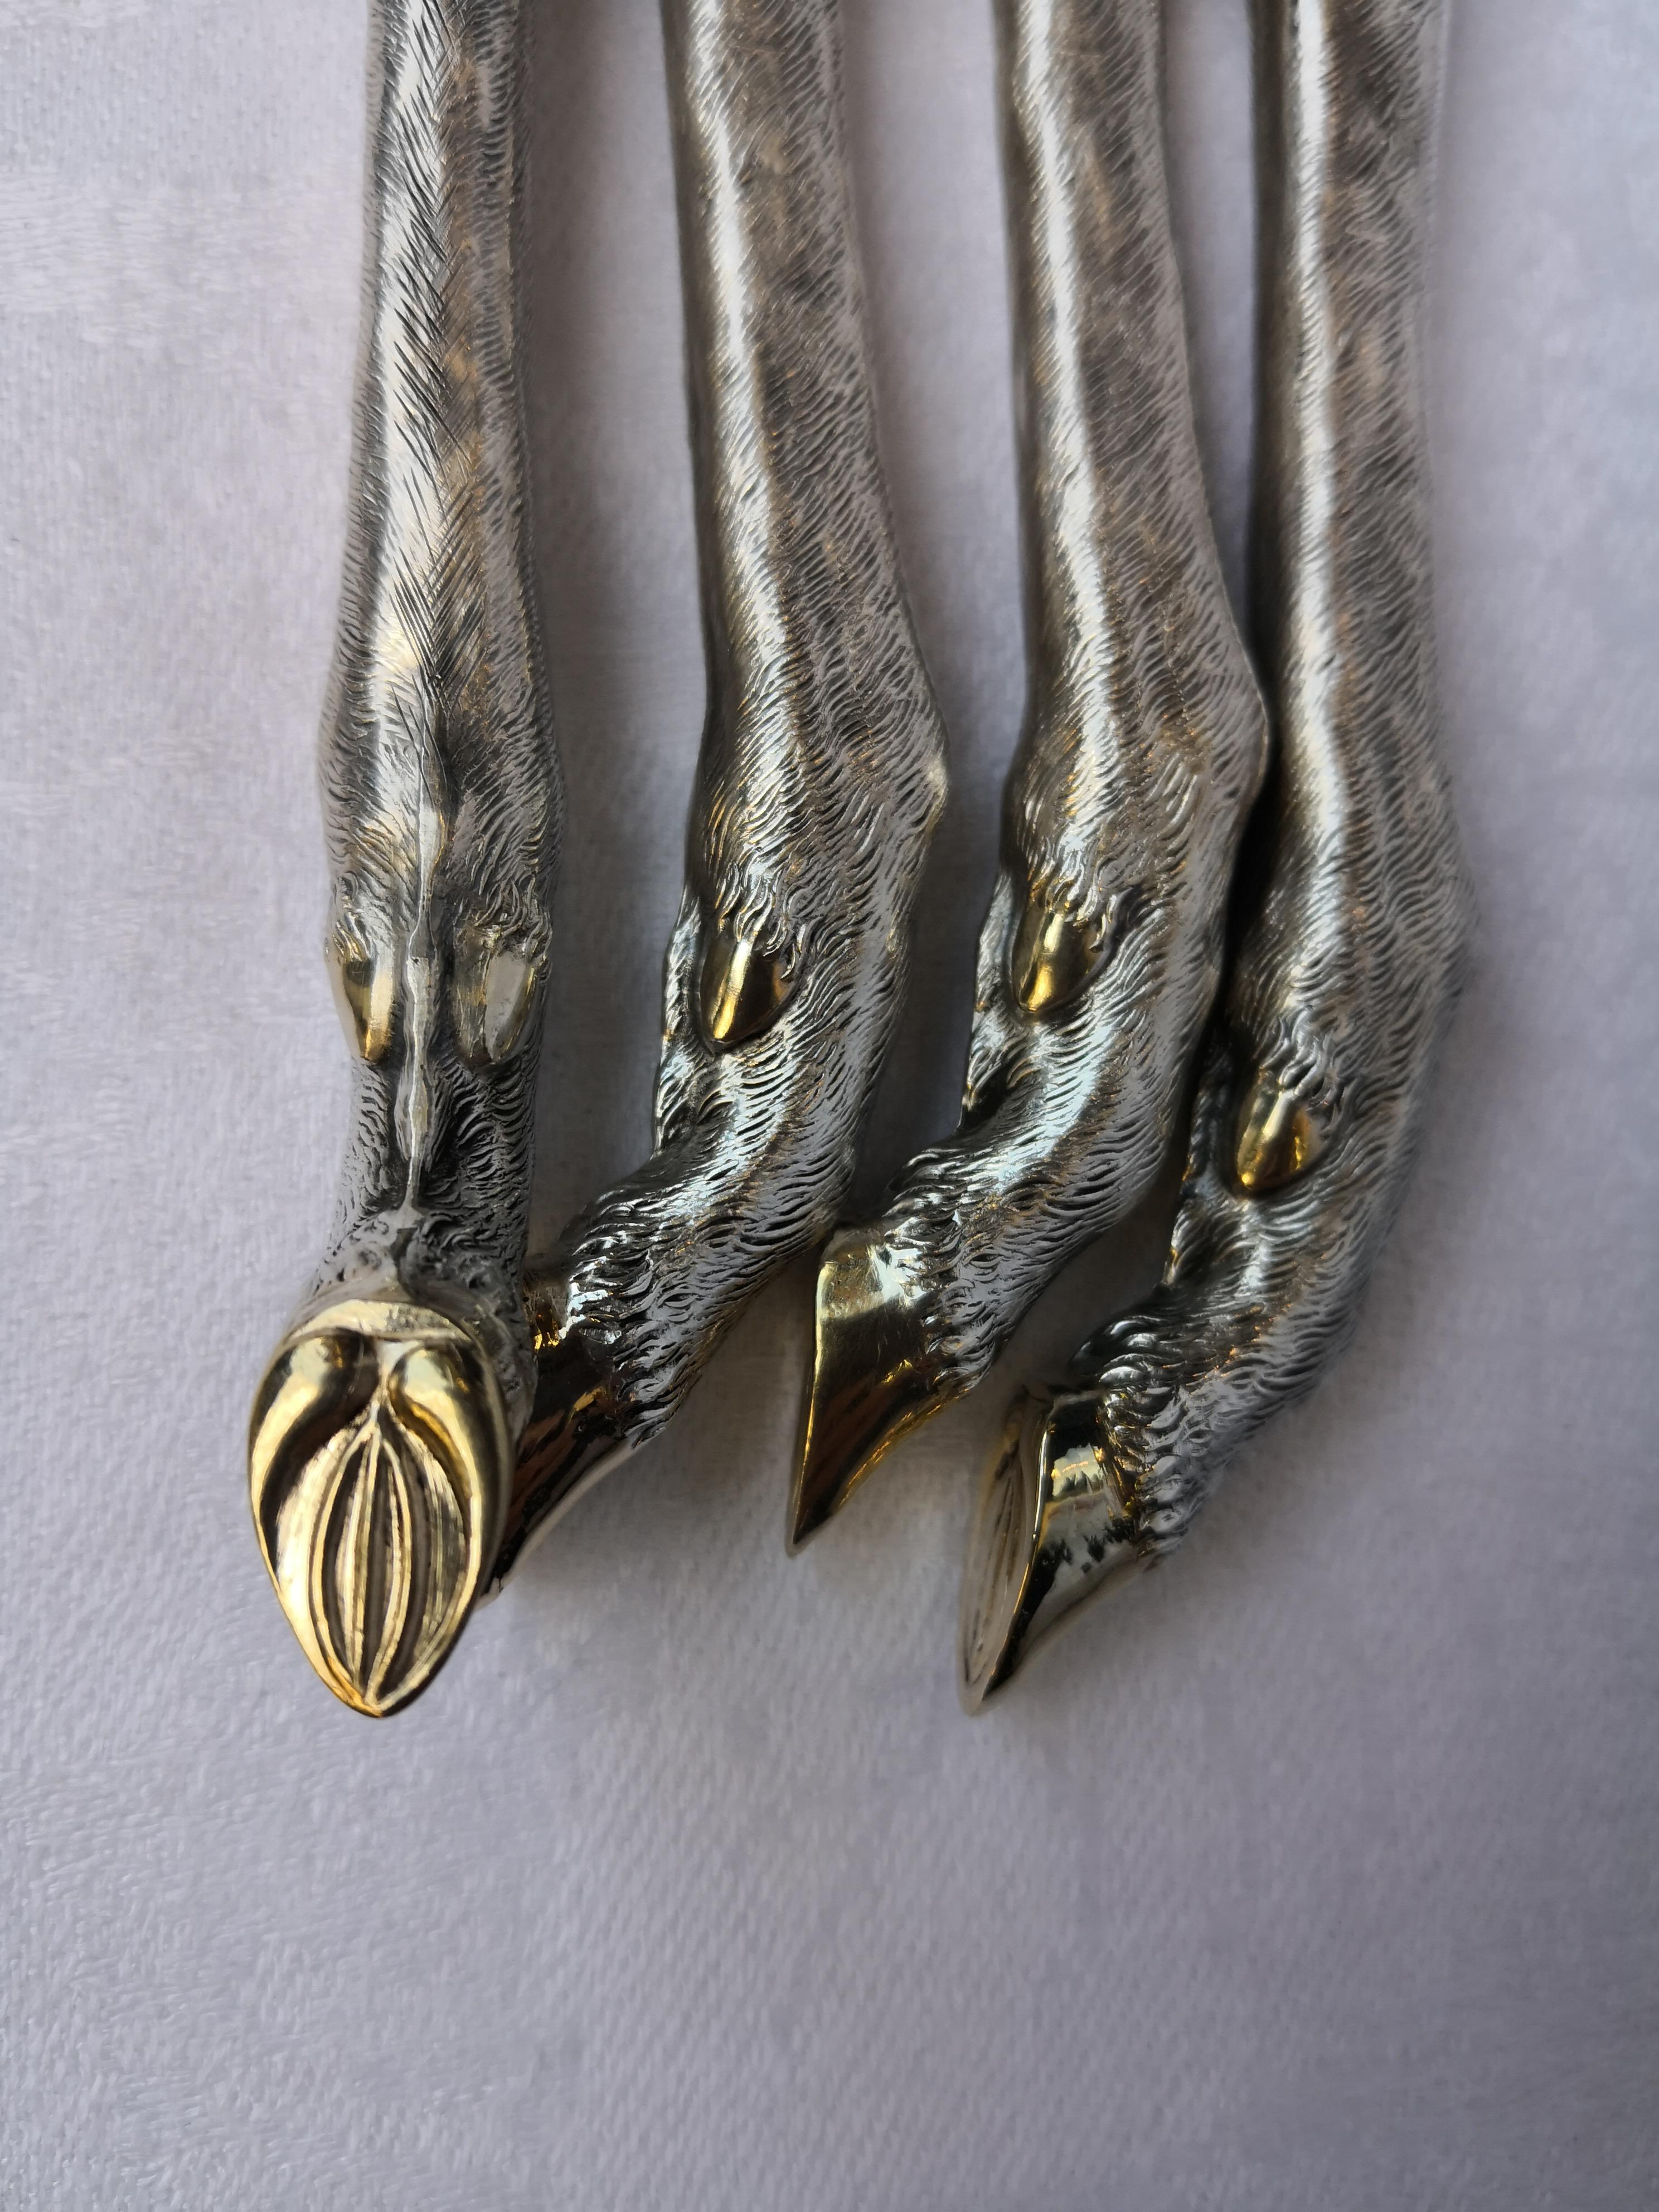 Impressive and fine handmade set of four serving cutlery in 800 silver. The handles are formed as exceptional detailed stag hooves in 800 silver on the end of each piece. The upon parts are stamped steel and gold gilt. Perfect table decoration for